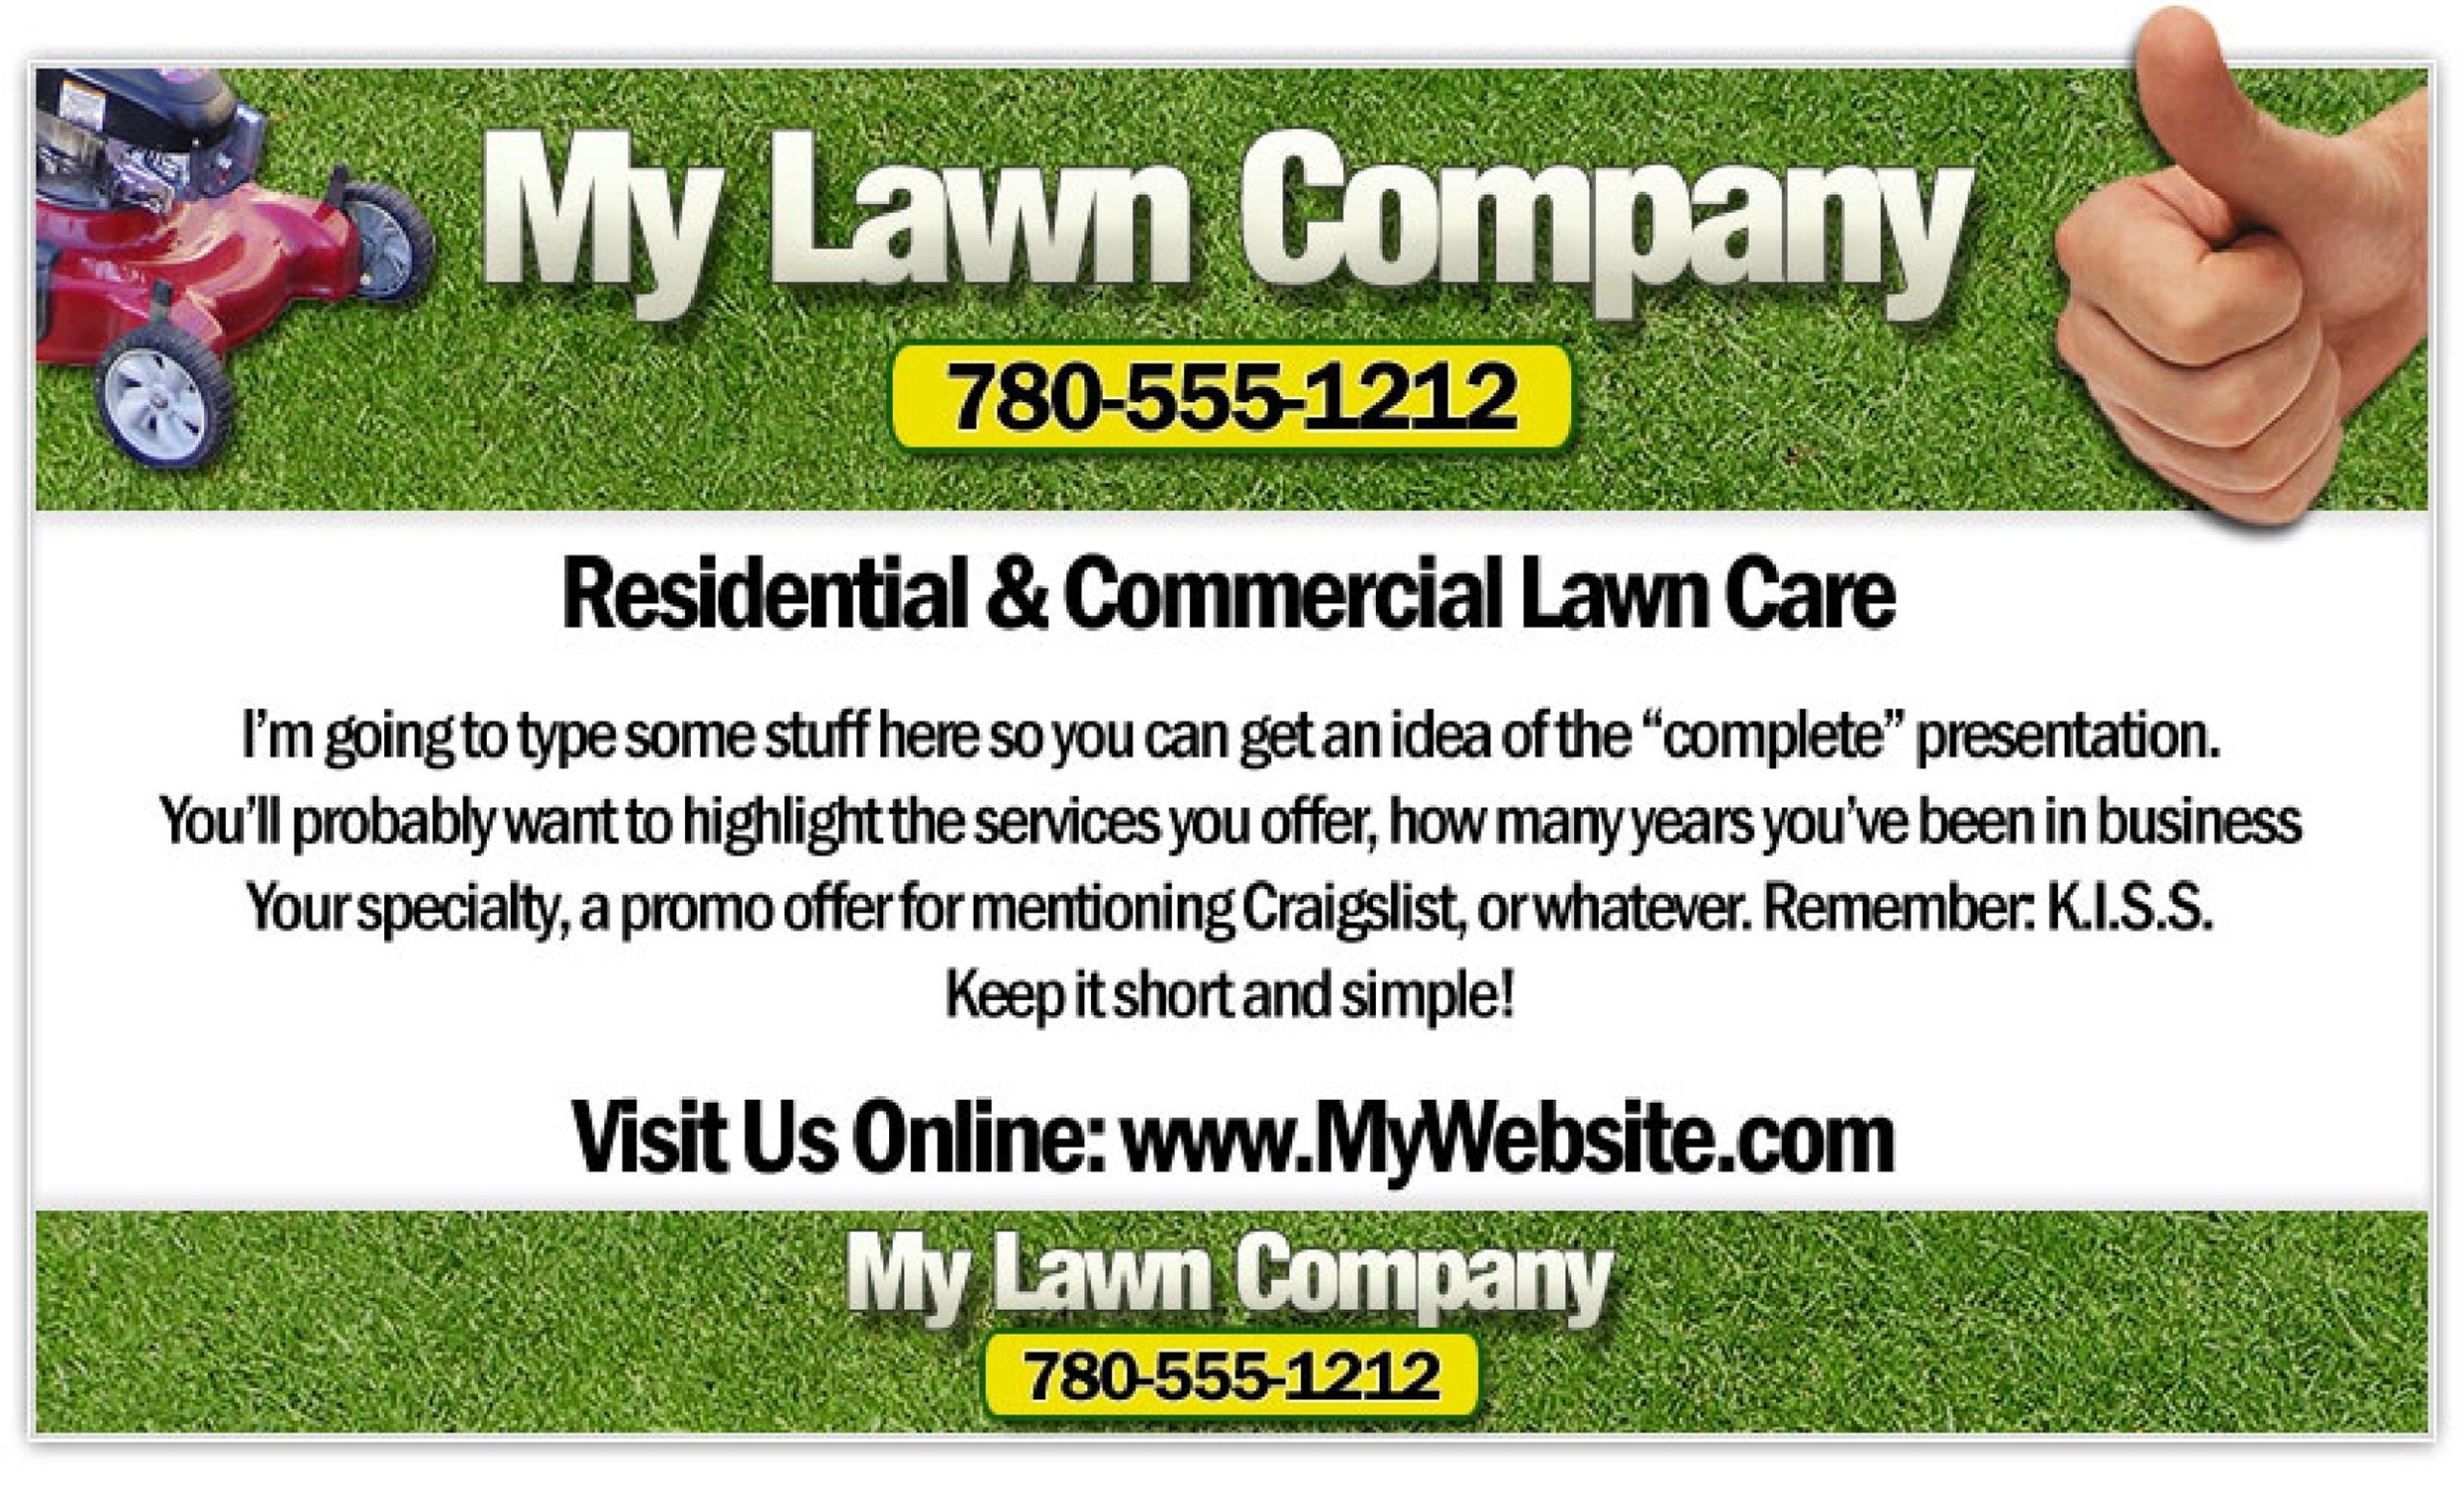 30 Free Lawn Care Flyer Templates [Lawn Mower Flyers] ᐅ Templatelab intended for Lawn Mowing Flyer Template Free